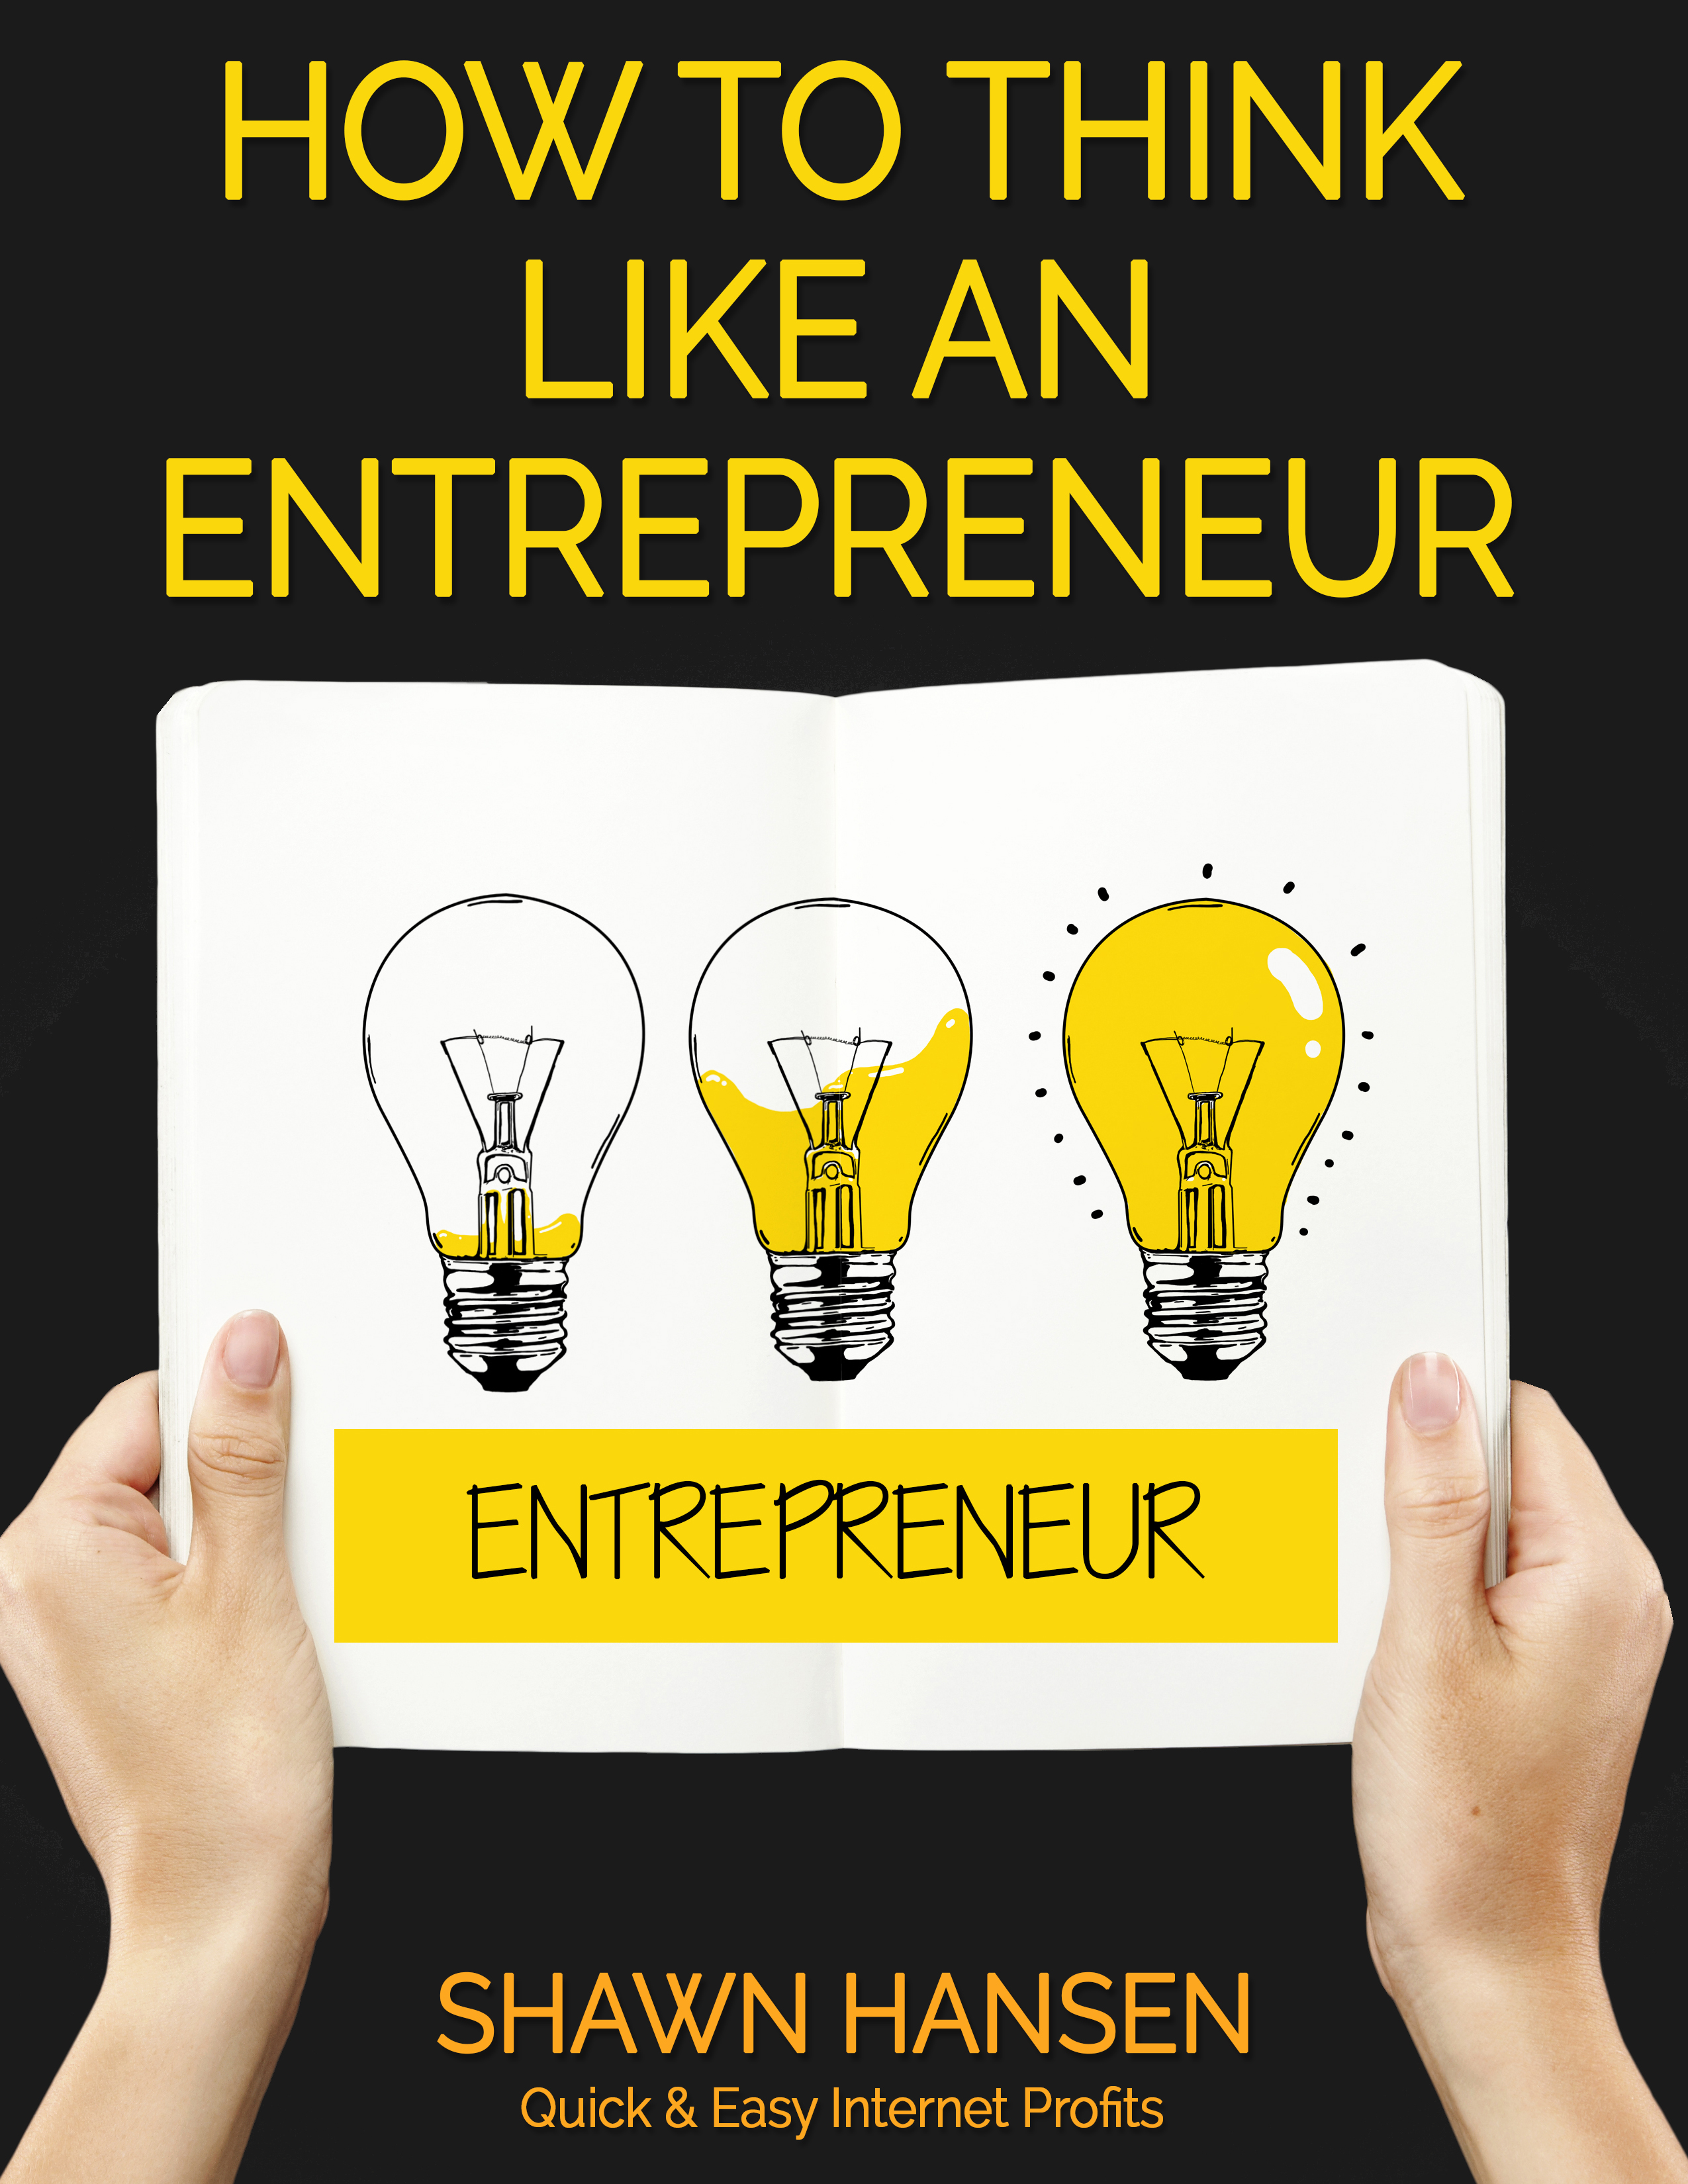 How to Think Like an Entrepreneur by Shawn Hansen